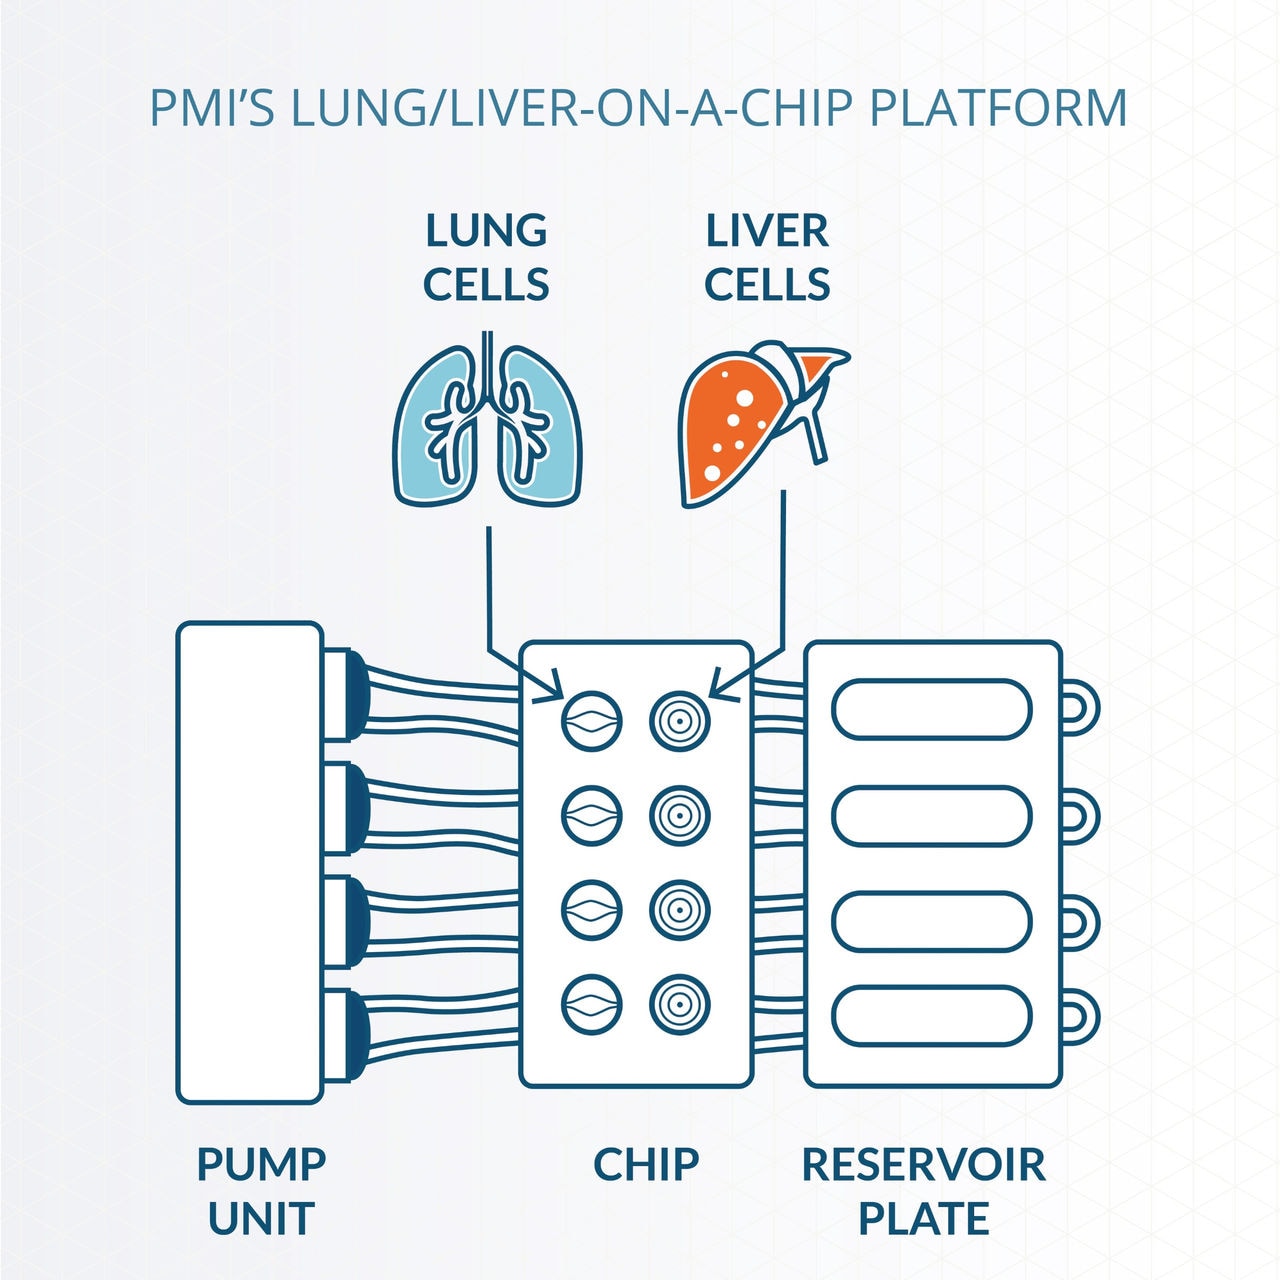 Infographic of a lung/liver-on-a-chip platform